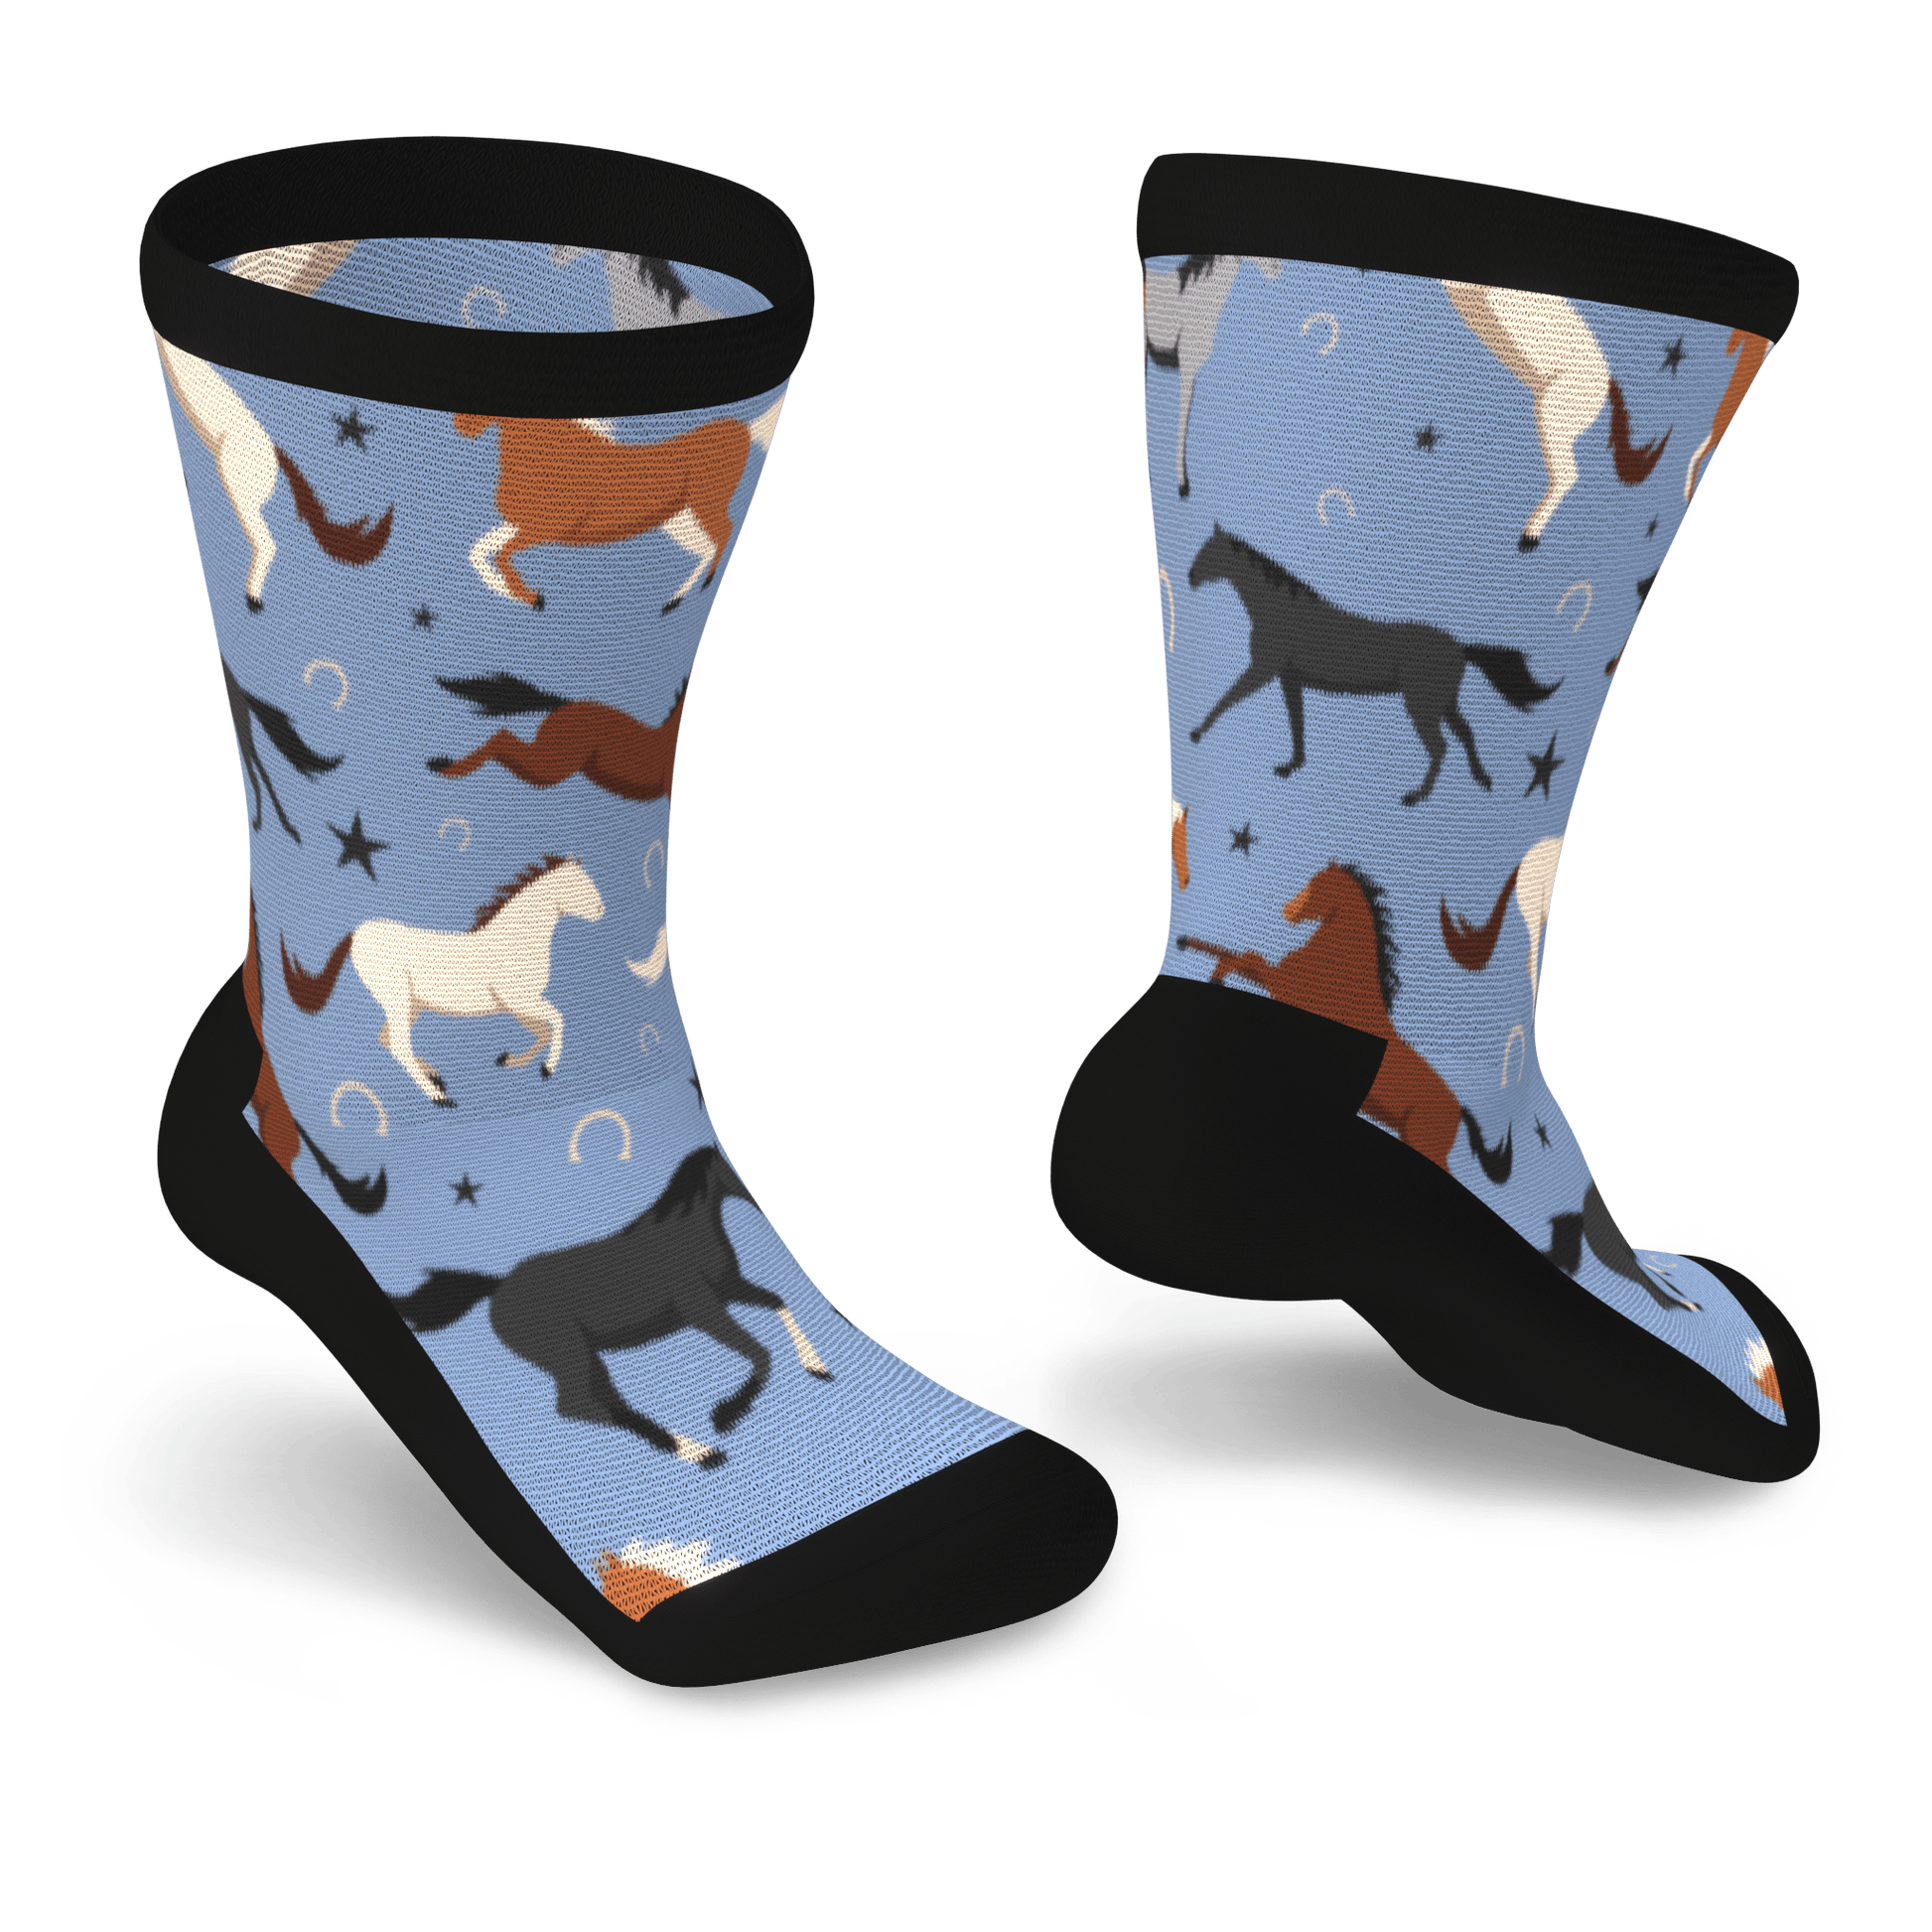 crew socks with horse on them